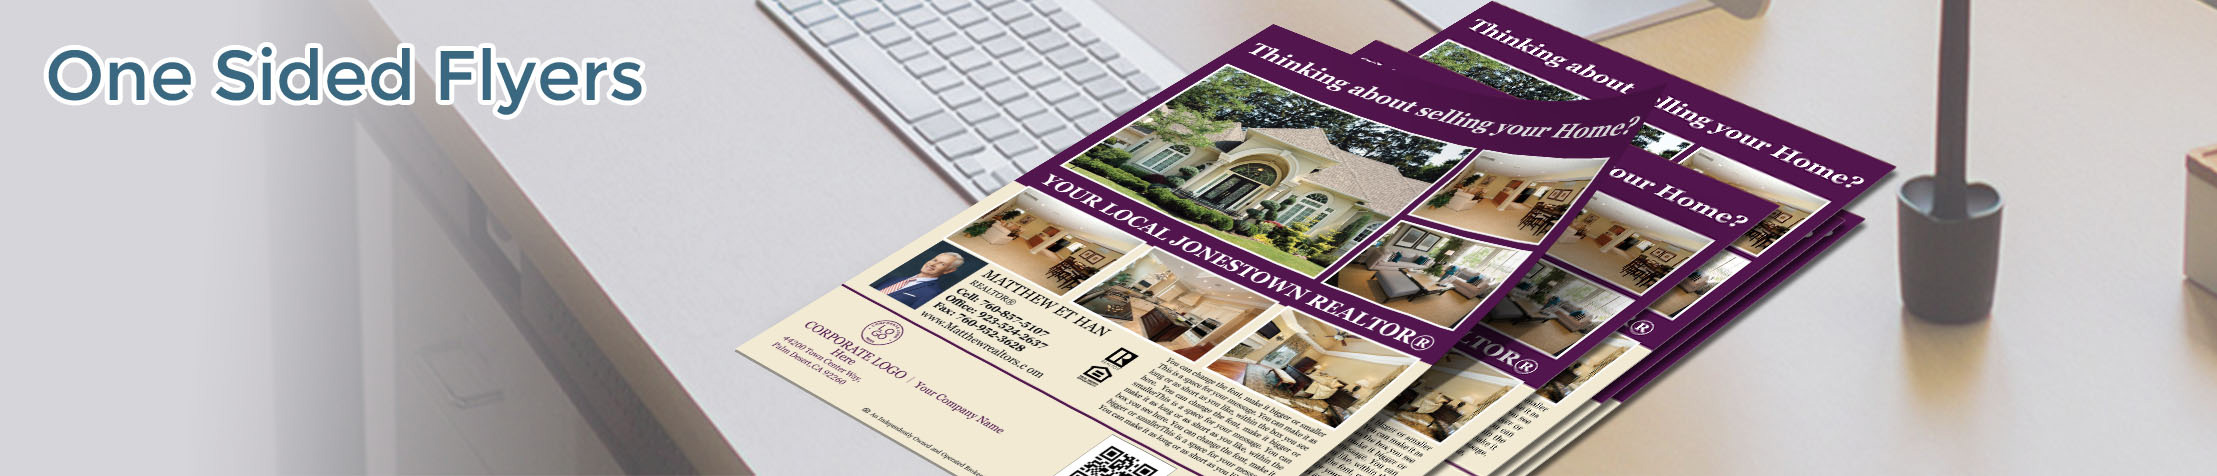 Berkshire Hathaway Real Estate Flyers and Brochures - Berkshire Hathaway one-sided flyer templates for open houses and marketing | BestPrintBuy.com